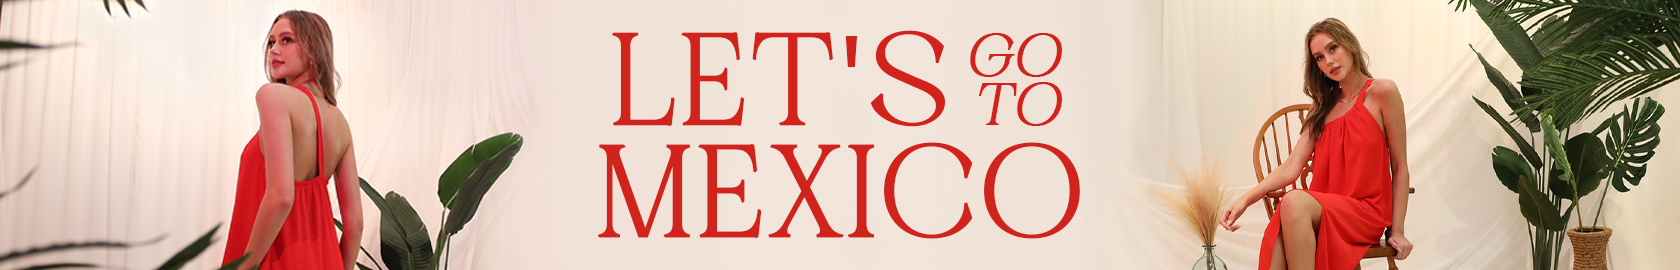 lets-go-to-mexico-header.jpg